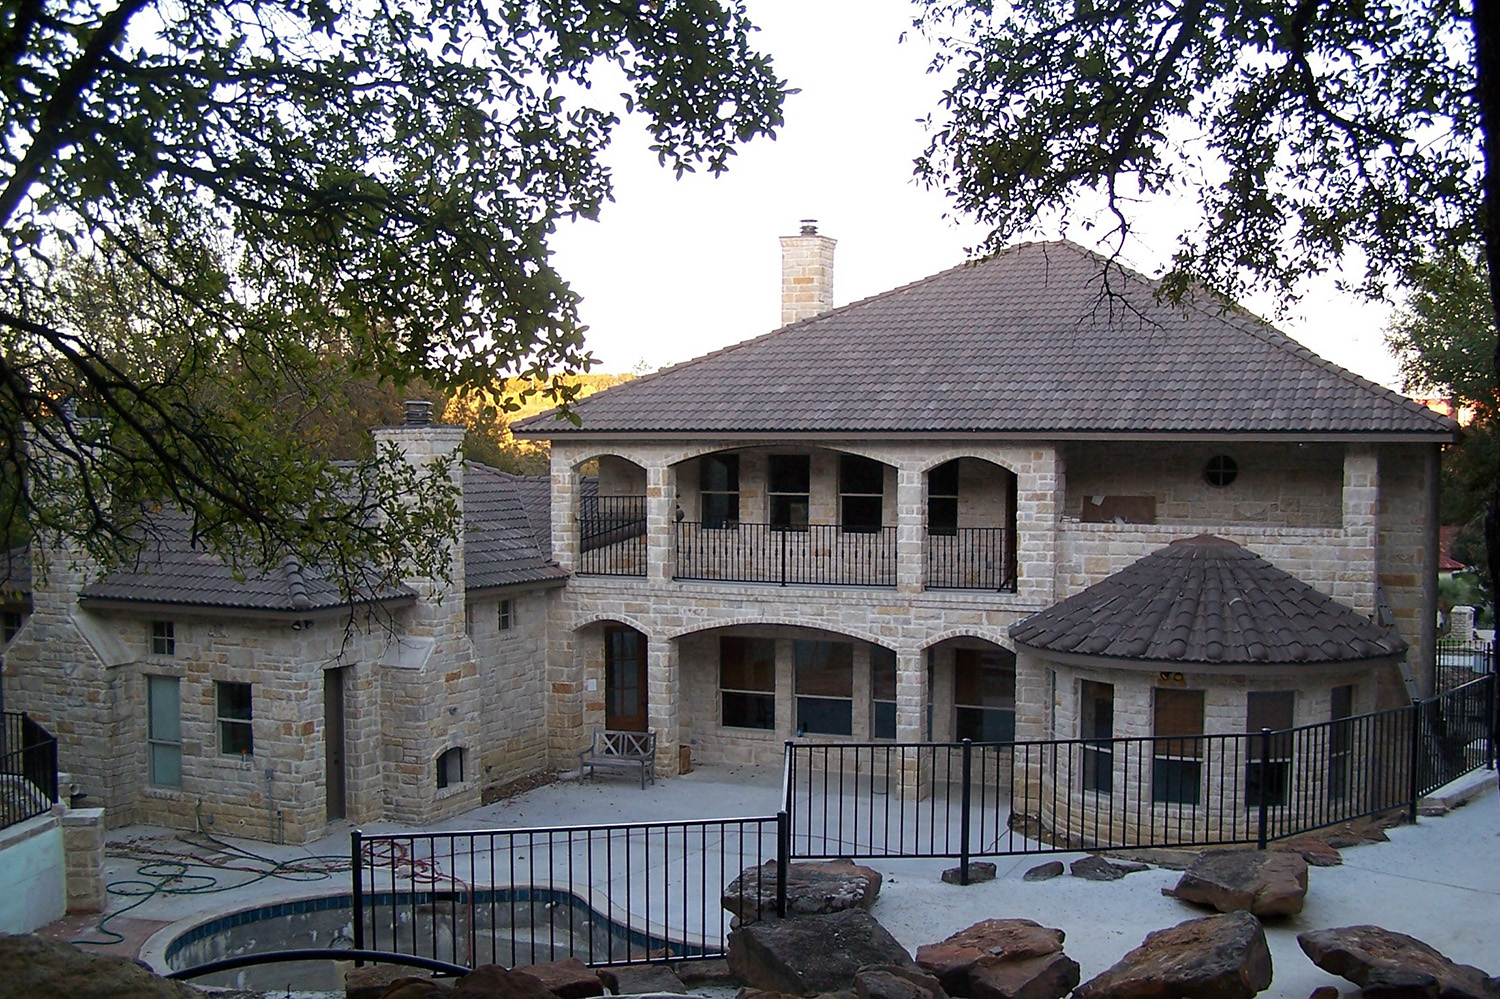 icf house in fort worth, texas with stone facade